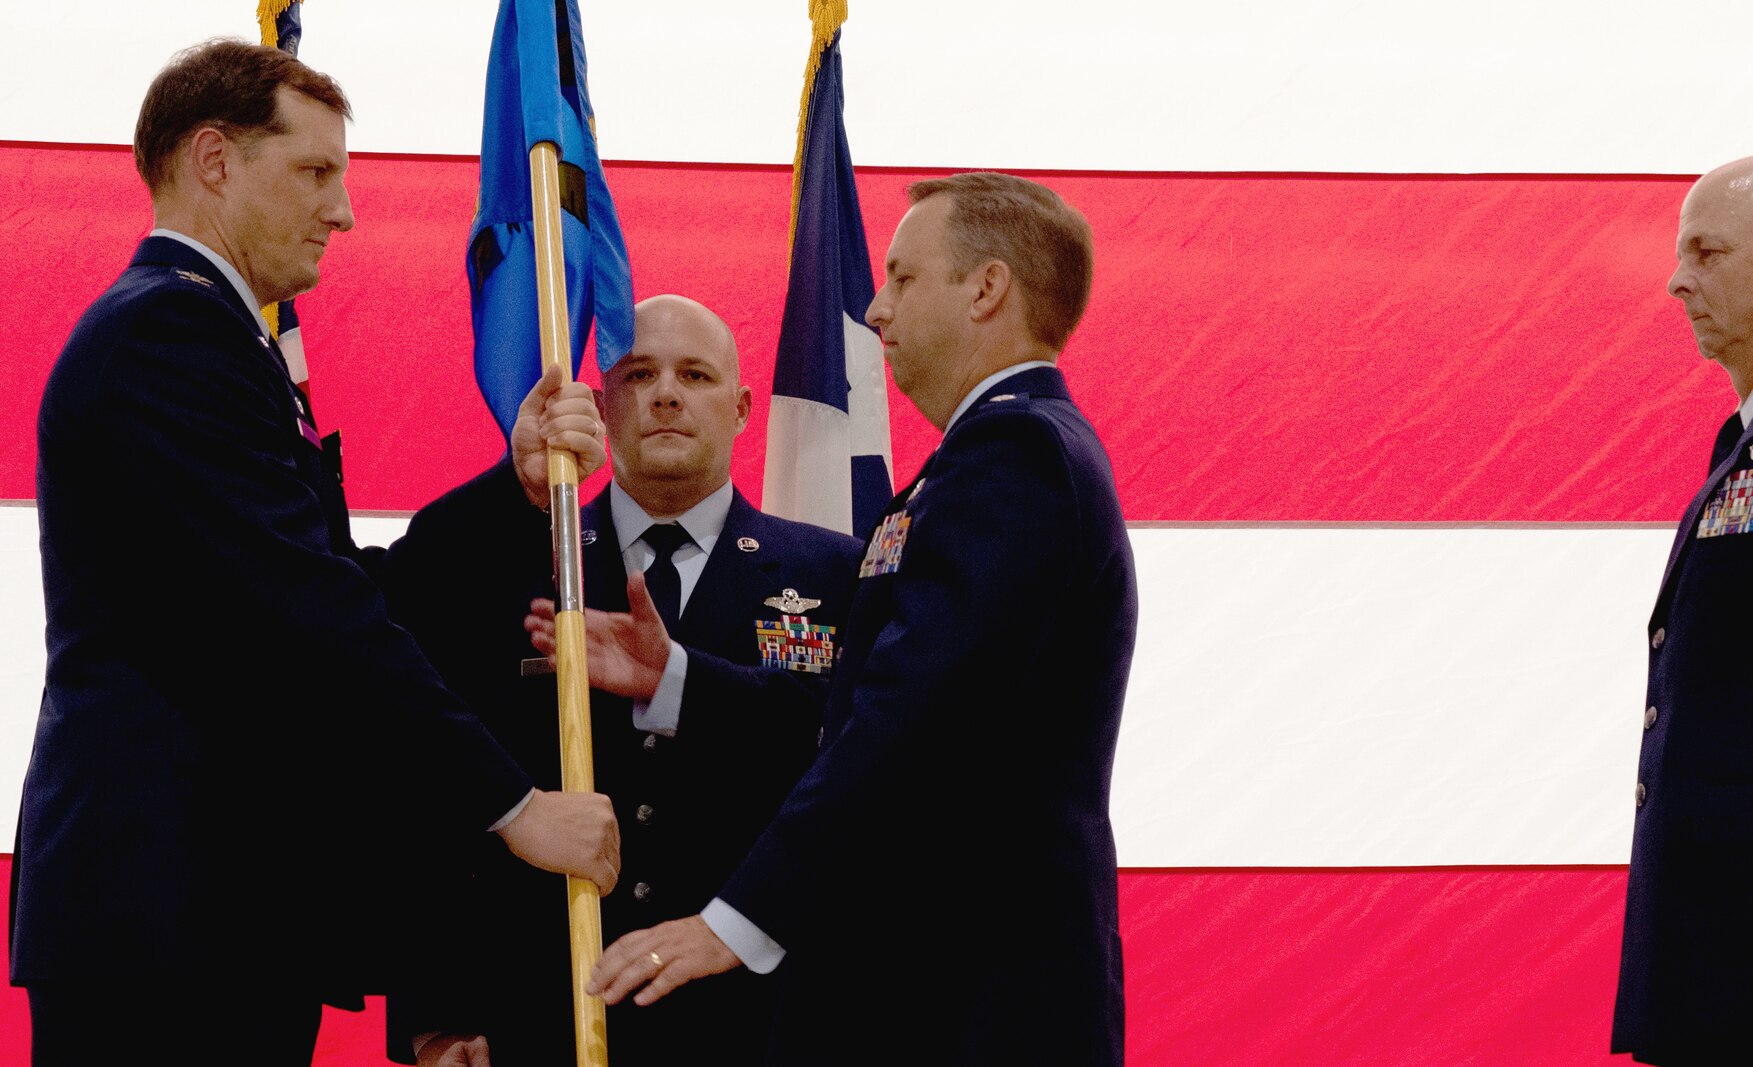 Man in Air Force uniforms hands flag to another man in Air Force uniform while on stage.